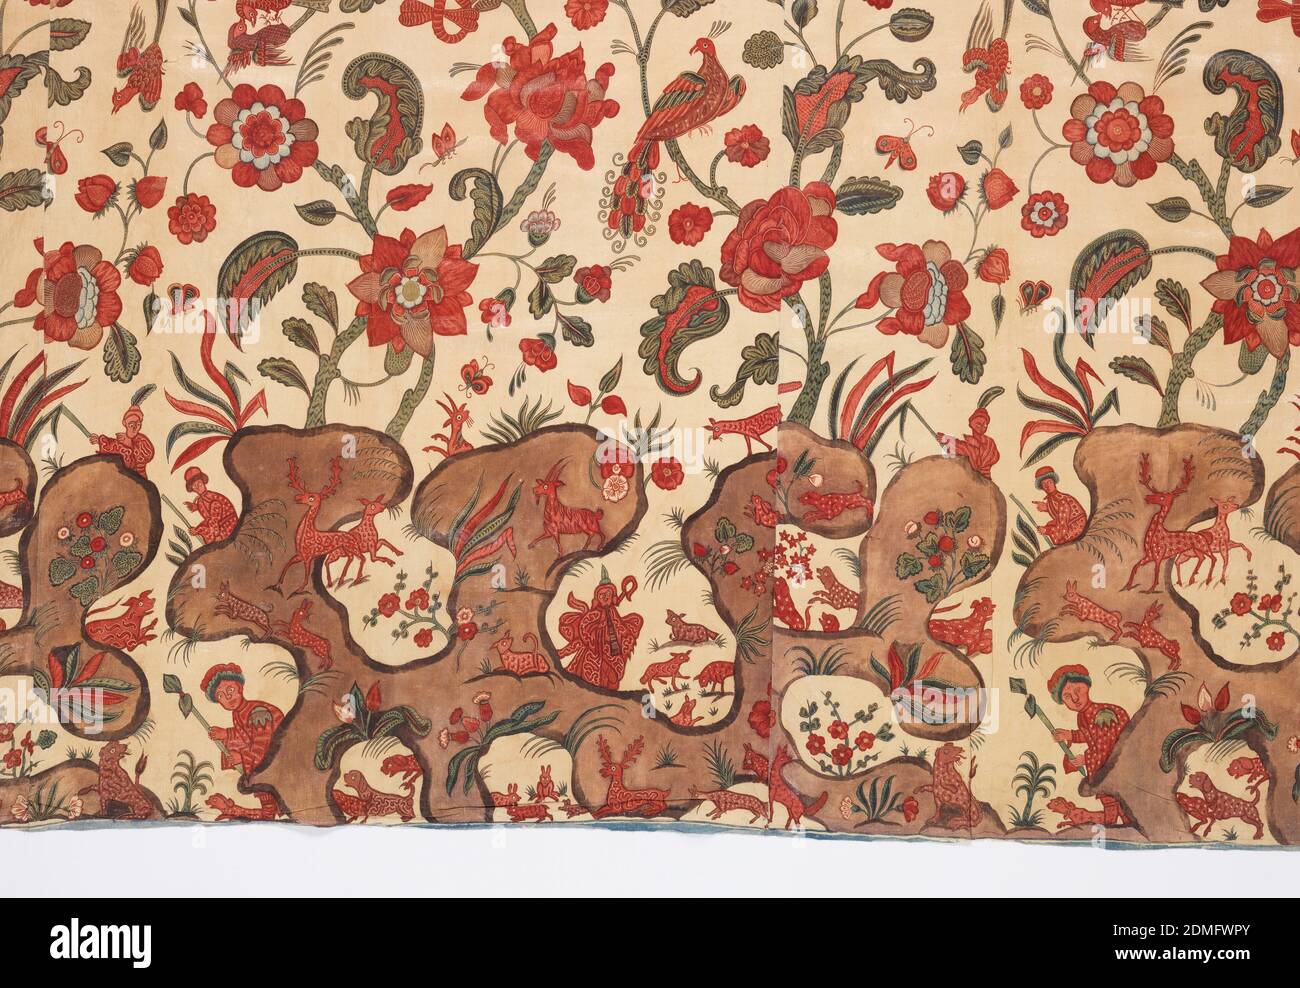 Bed hanging, Medium: cotton Technique: mordant painted and dyed plain weave (chintz), Large hanging of cotton chintz, lined with pale blue Chinese silk damask (now removed), contemporary with the chintz, and bound on three sides with twill curtain binding. The design is of large-scale flowering branches with large blossoms, smaller sprays of flowers, and heavily curved leaves, with birds (peacocks, parakeets, and pheasants) perched among them. With exception of certain leaves, design elements have different color scheme and internal decoration with each repetition Stock Photo